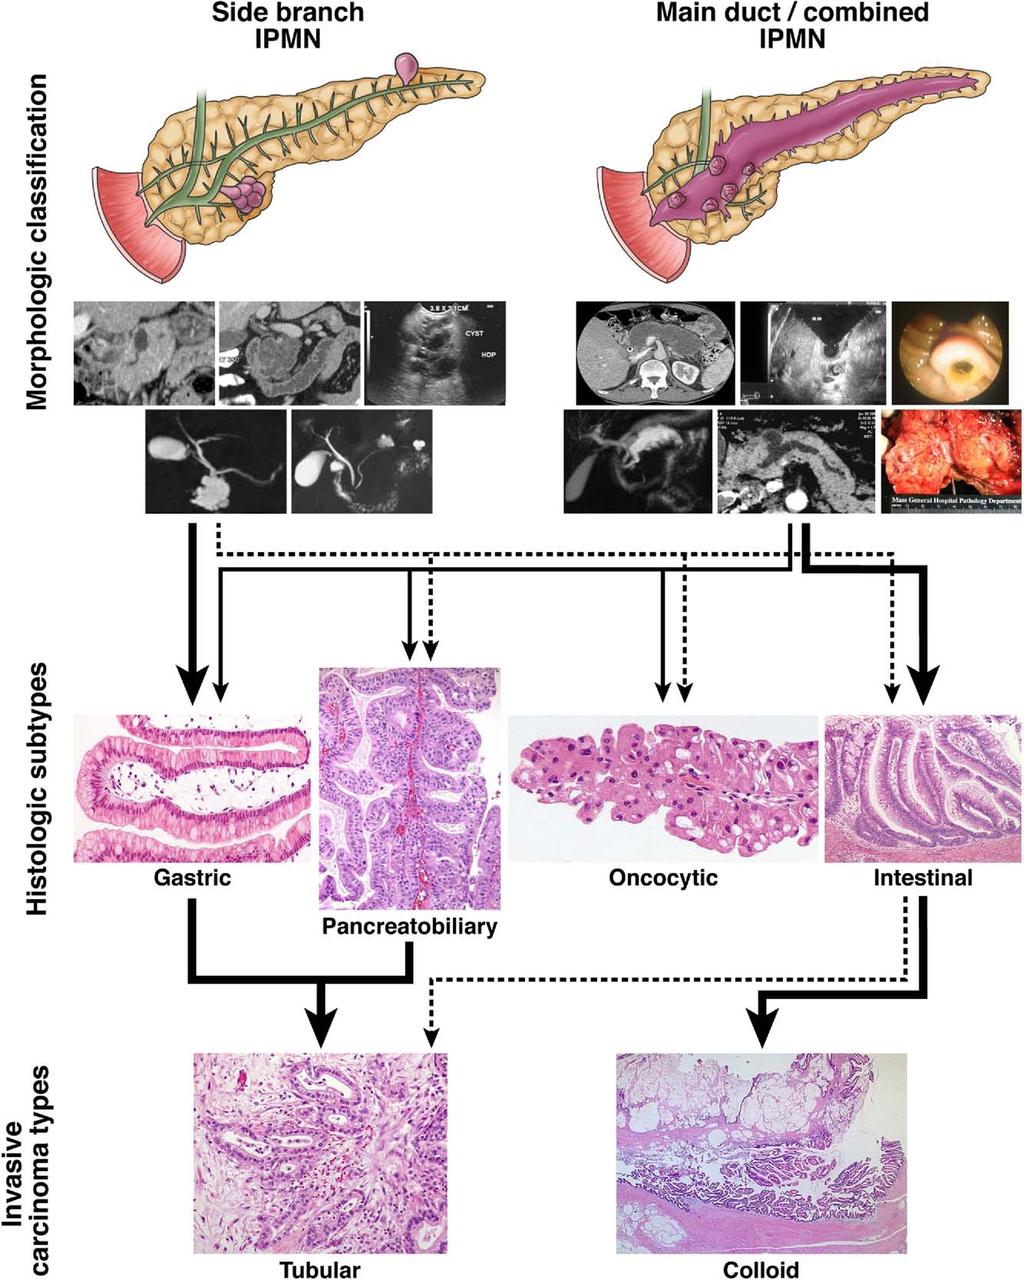 Figure 1. Morphologic and histologic subtypes of IPMNs, as well as the types of invasive cancer.